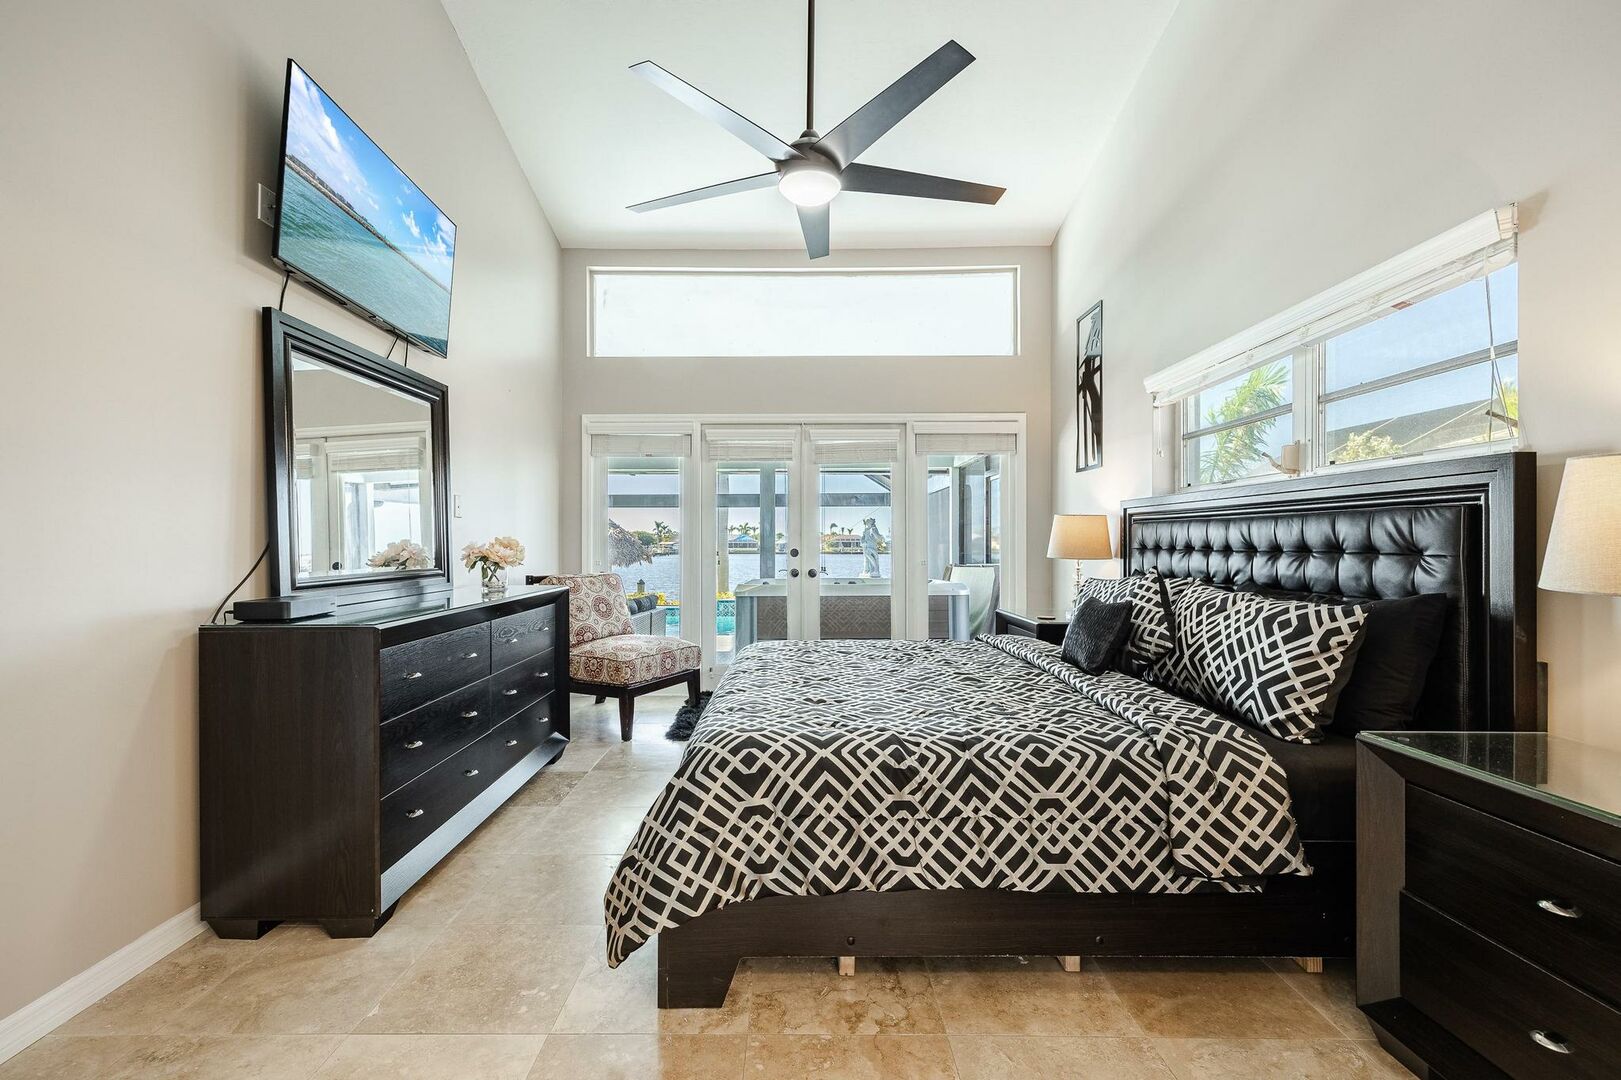 Master bedroom with lanai access